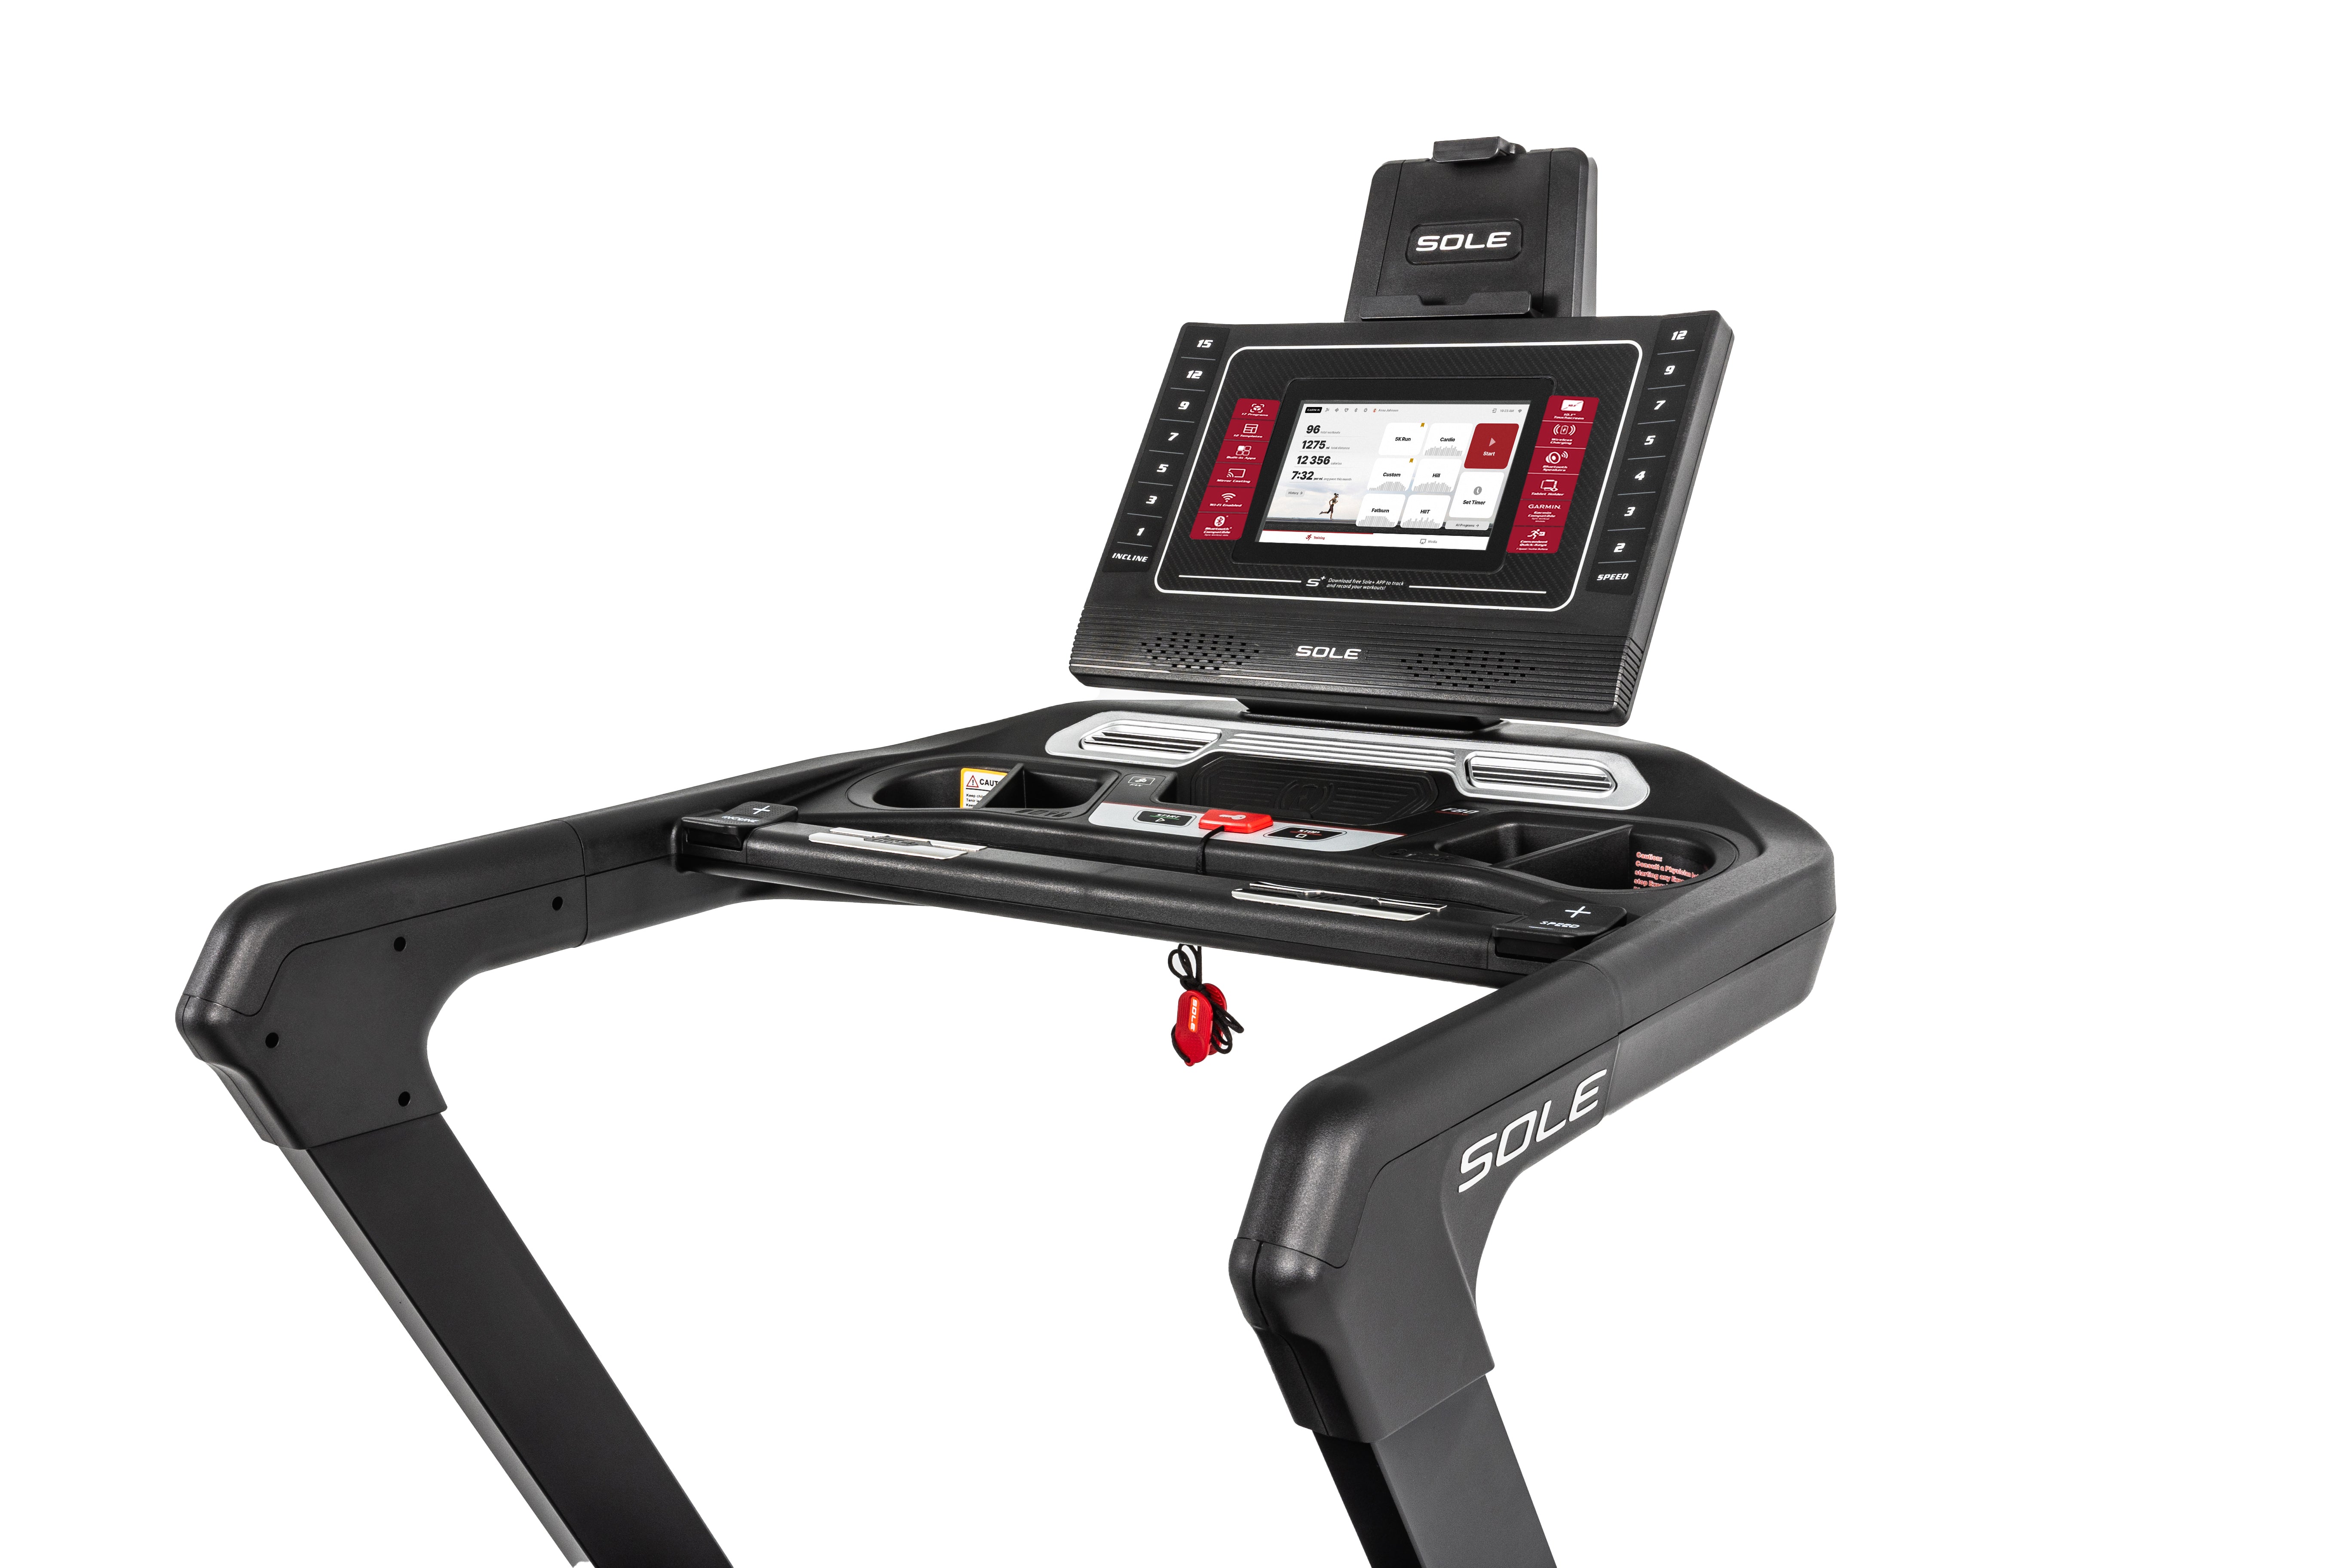 Close-up view of the Sole F80 treadmill's console area, featuring a digital touchscreen display, emergency stop key with red cord, button controls, and the "SOLE" logo on the handrails.